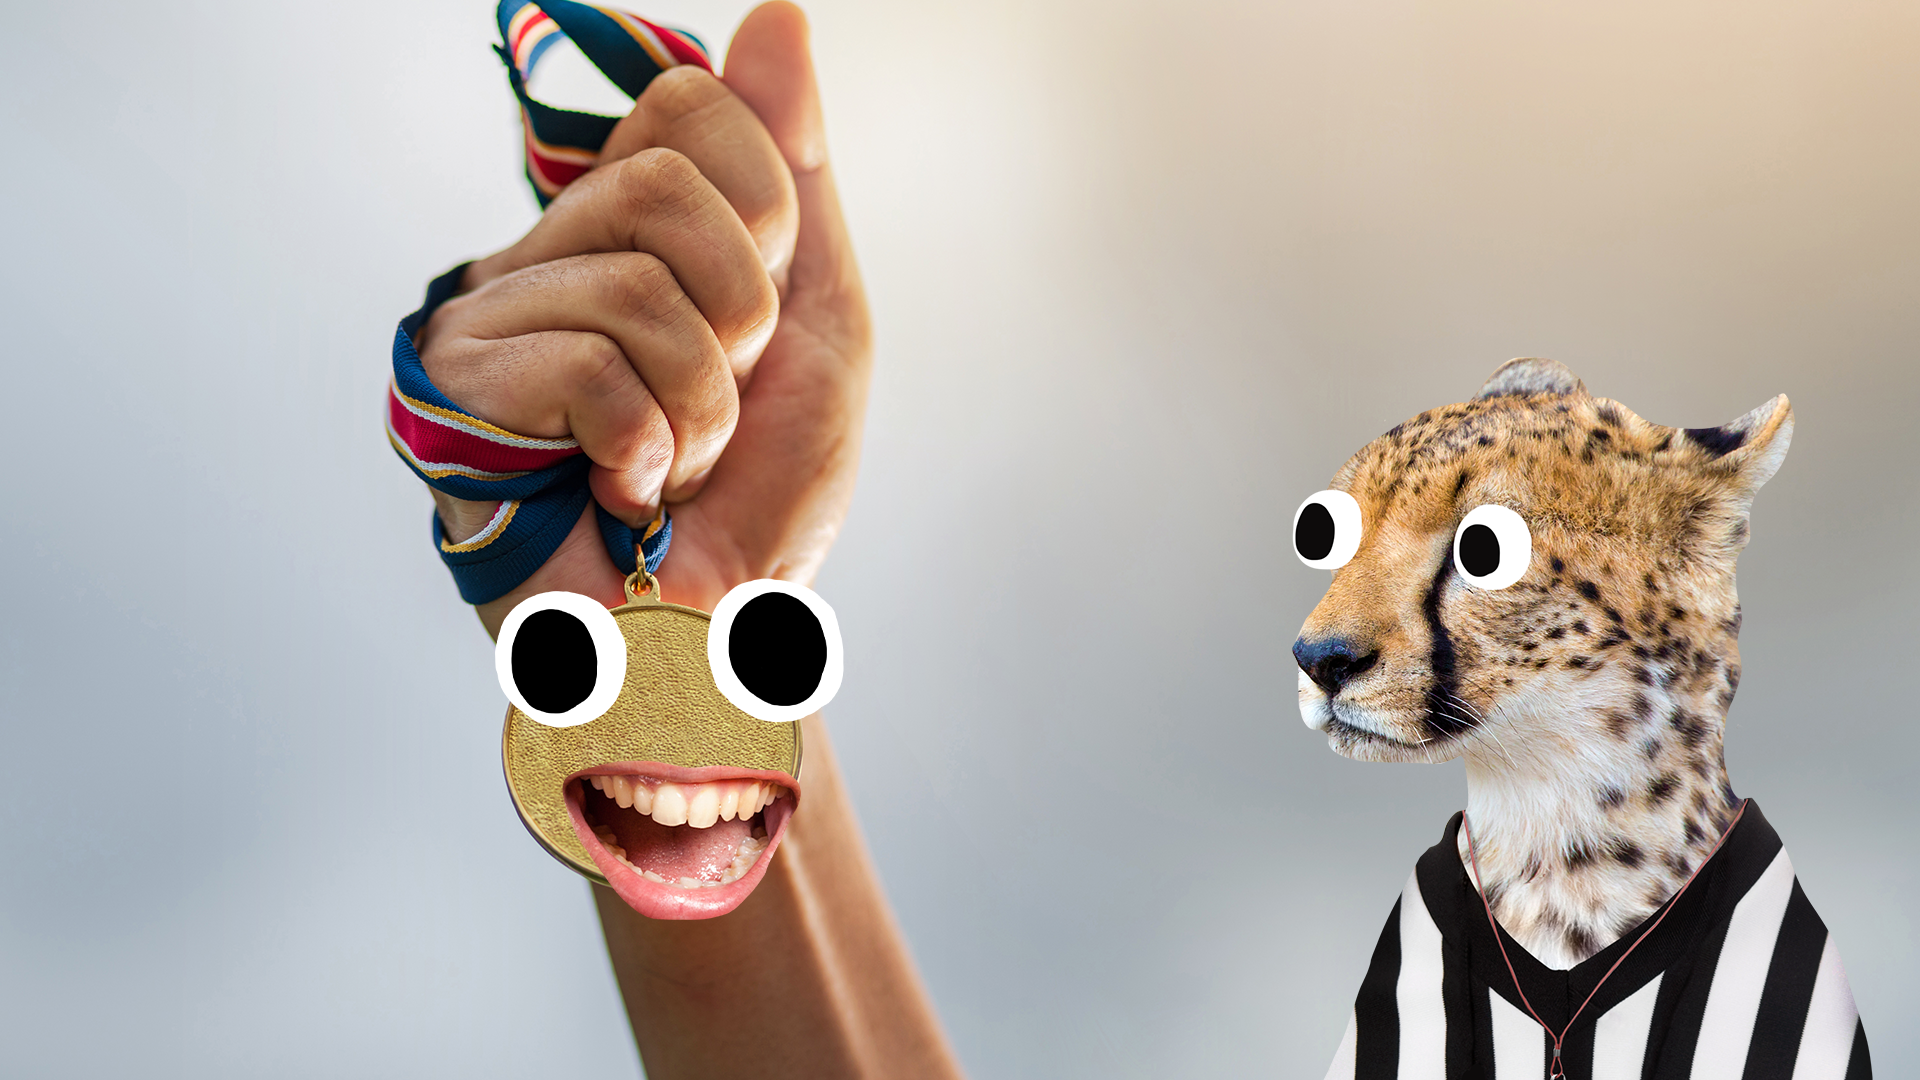 Arm holding medal with face, cheetah referee looking surprised